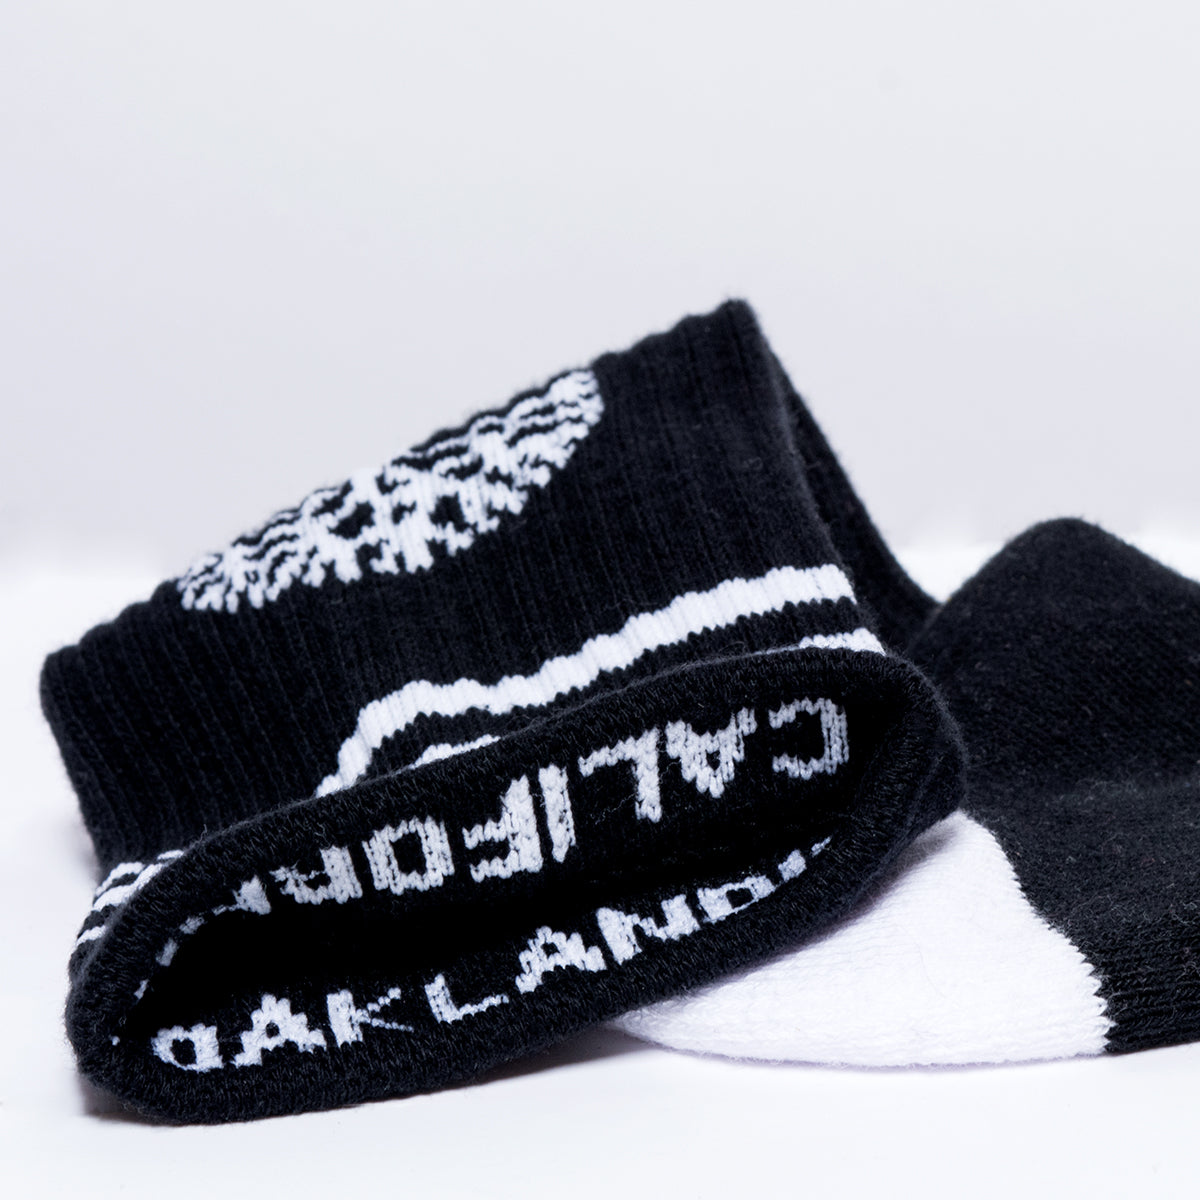 Top of a single black crew sock exposing OAKLANDISH and CALIFORNIA wordmarks on the inside cuff.